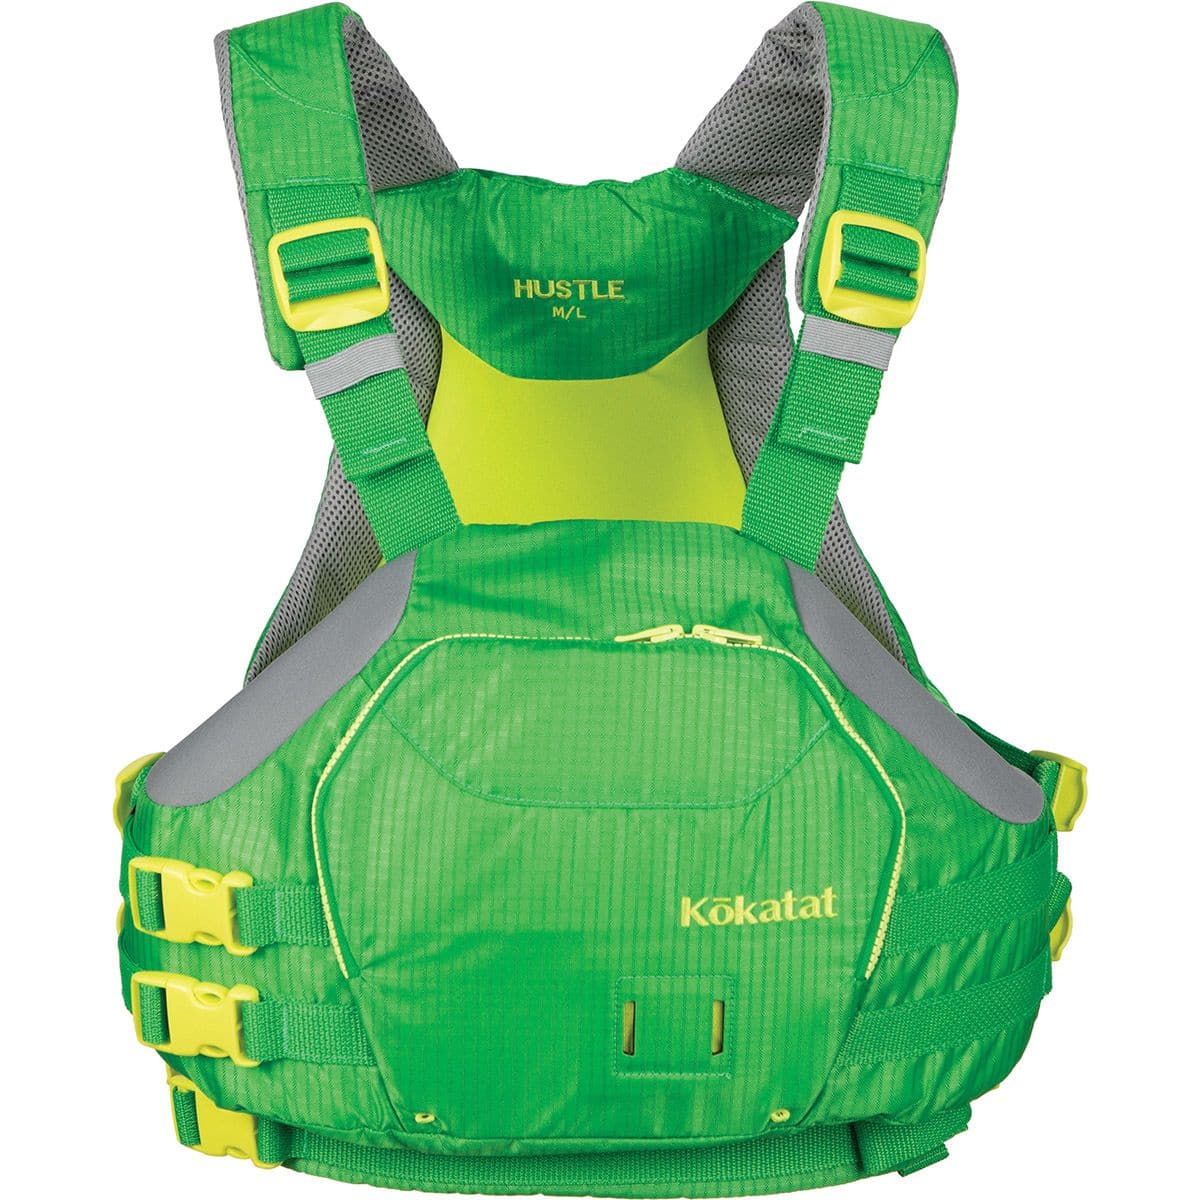 Featuring the Hustle PFD men's pfd, women's pfd manufactured by Kokatat shown here from a second angle.